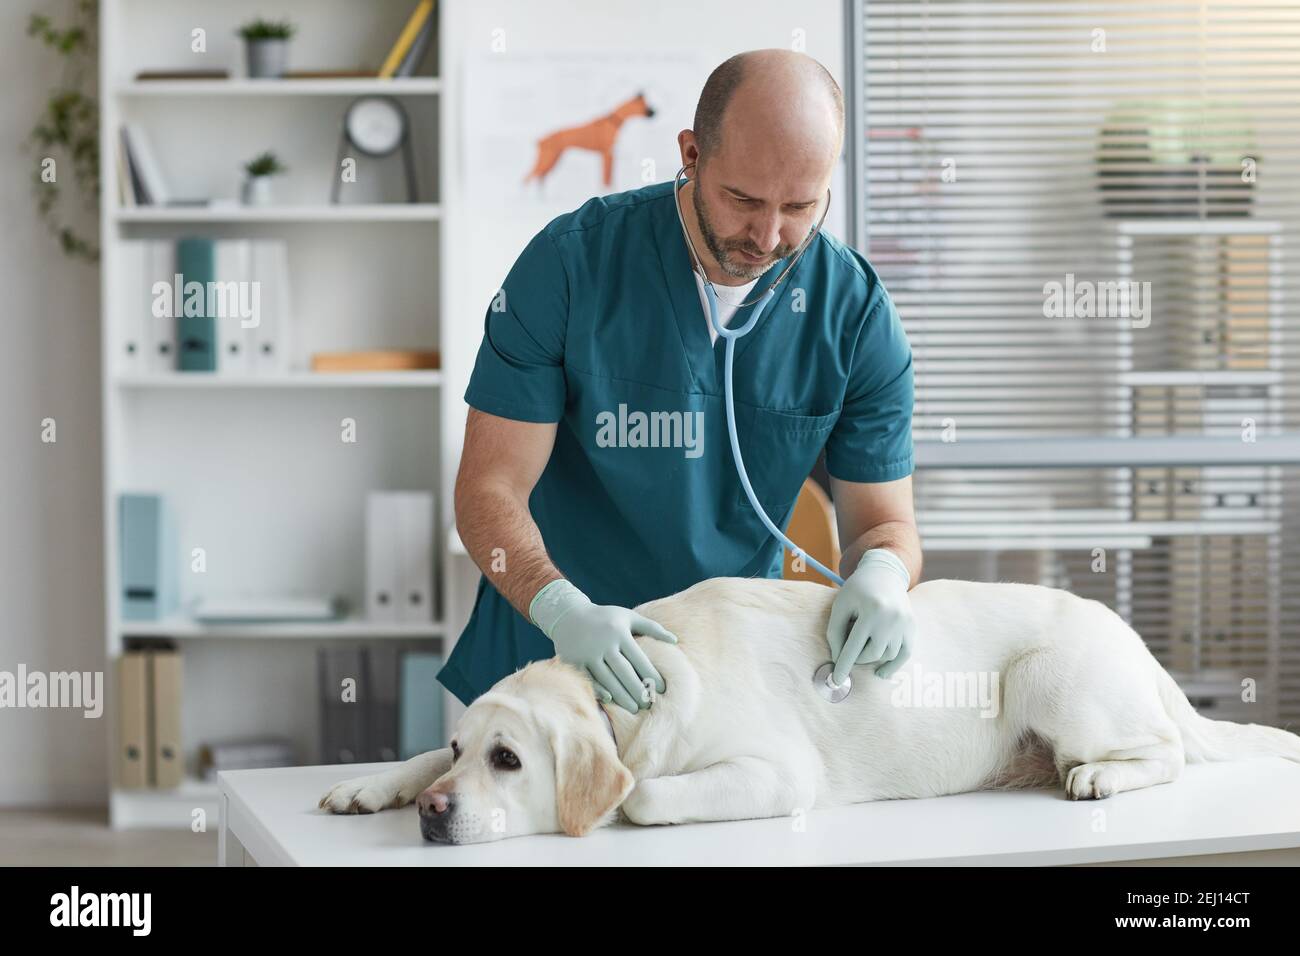 Side view portrait of mature veterinarian listening to heartbeat of dog during examination at vet clinic, copy space Stock Photo